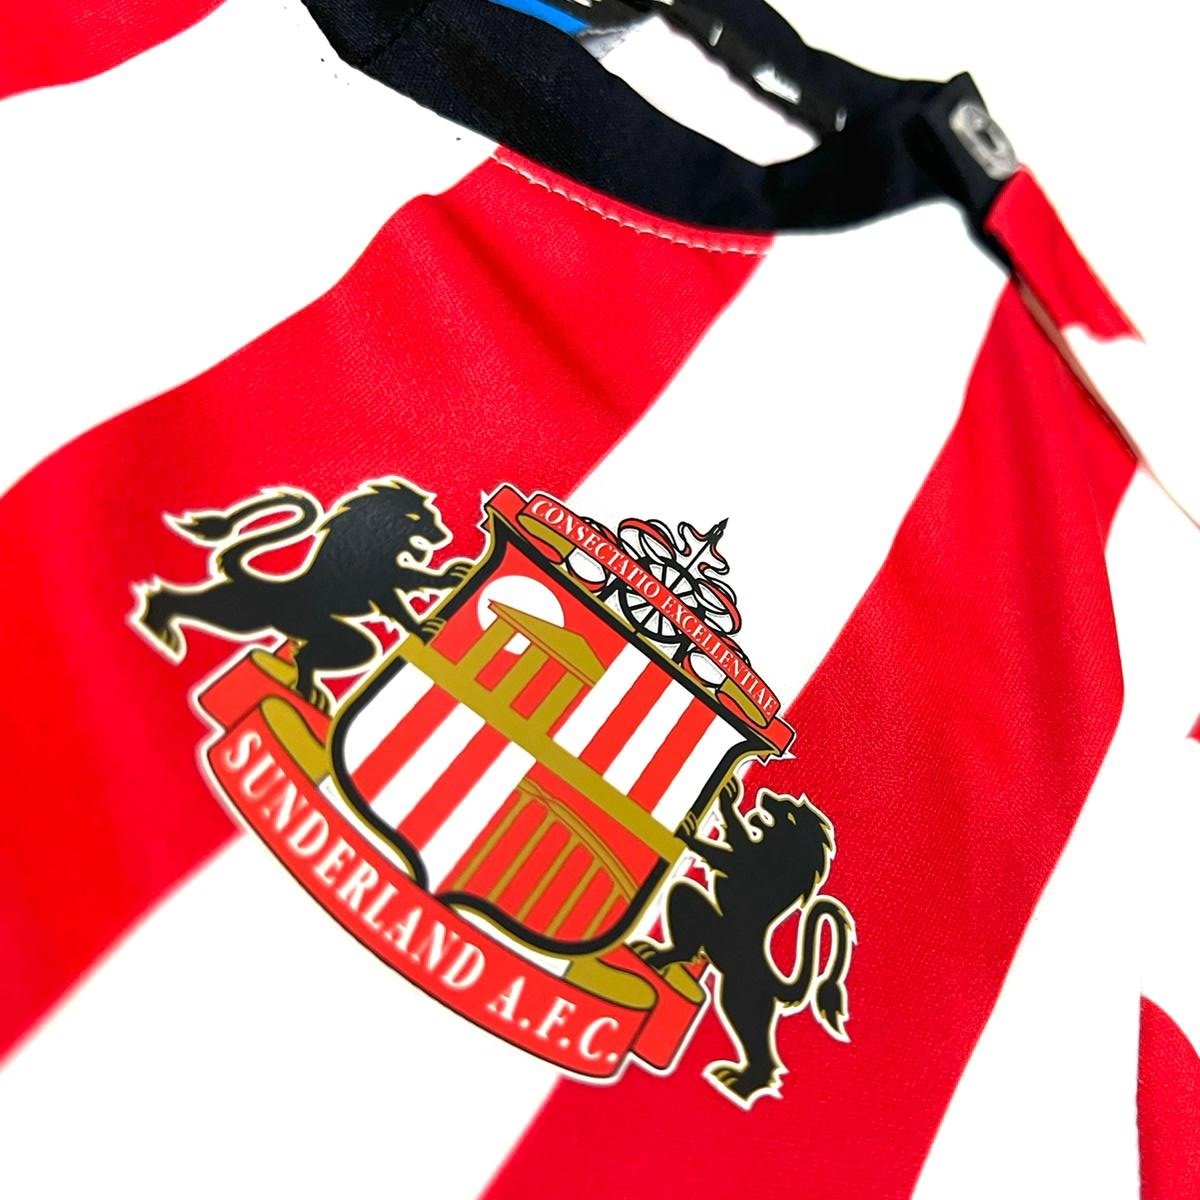 Buy the 22-23 Baby Home Kit online at Sunderland AFC Store